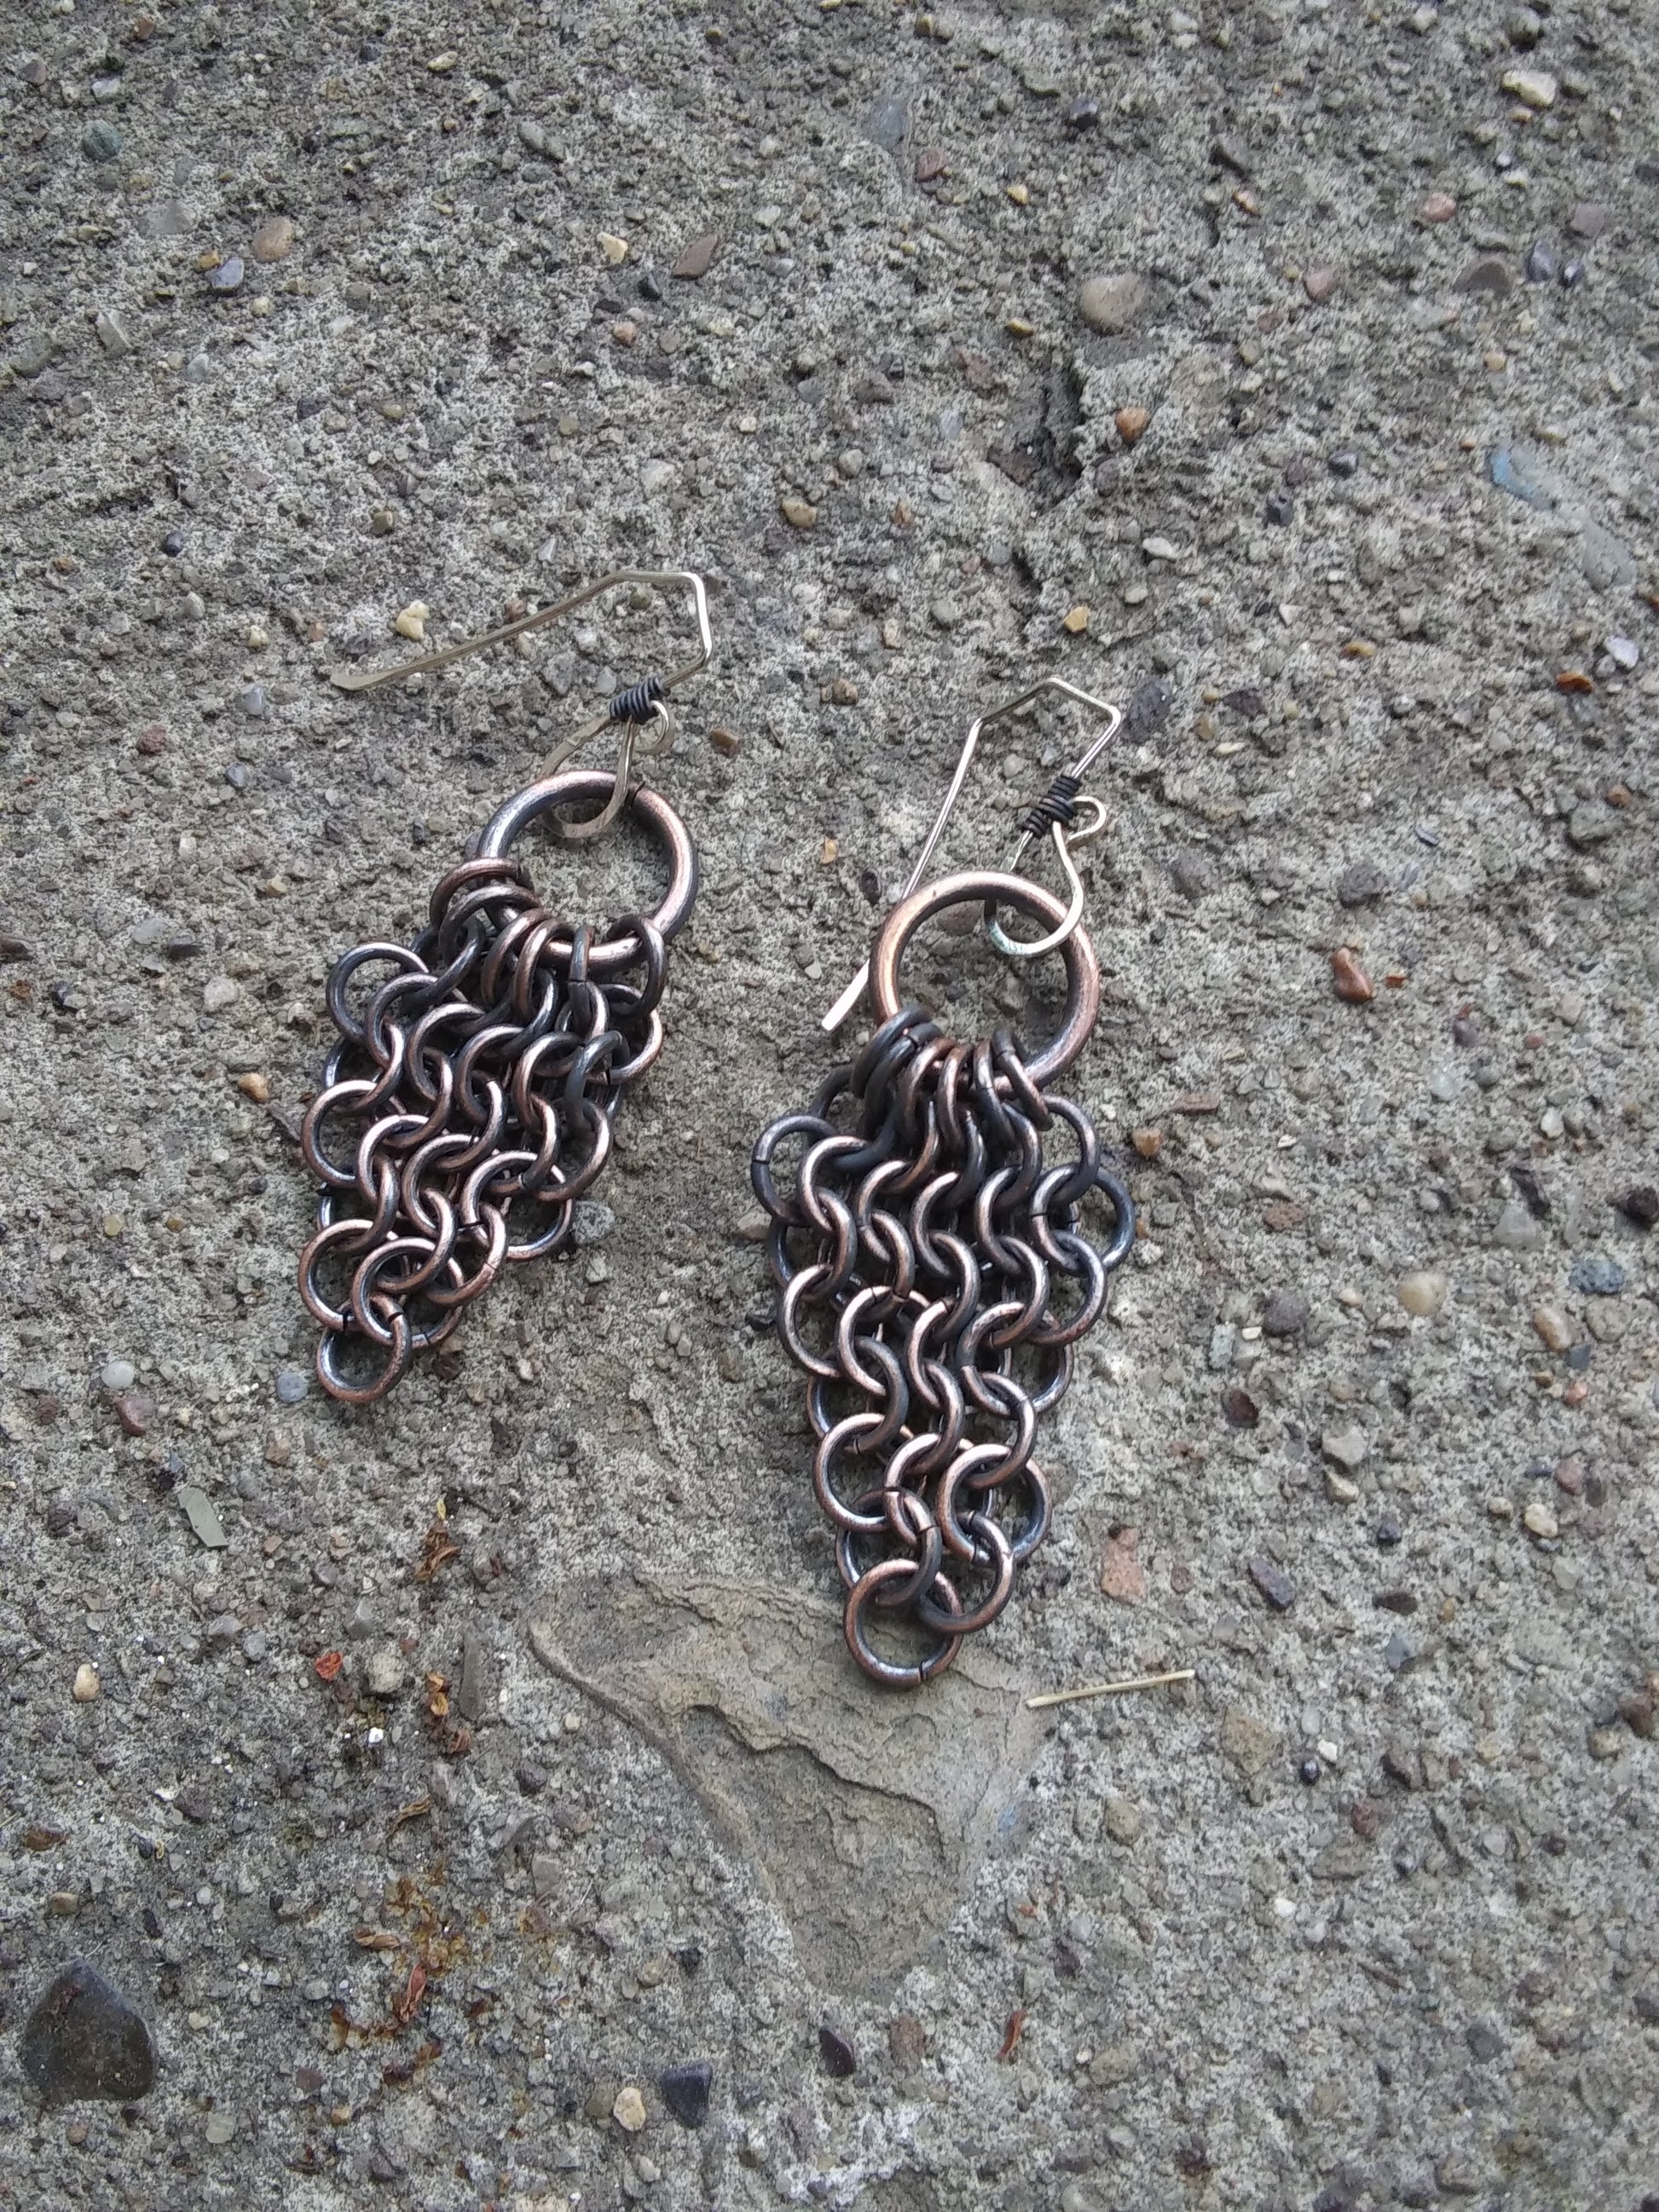 witch store pittsburgh, small chainmail earrings, gothic chainmail hoop earrings , elegant chainmail earrings, elegant chainmail, distressed jewelry, distressed earrings, distressed copper jewelry, distressed copper earrings, goth girl earrings, distressed copper, dark copper jewelry, dark copper earrings, copper hoops, copper earrings hoops, copper earrings, copper chainmail dangles, copper chainmail, copper chain link earrings, copper bib chainmail hoop earrings, artisan copper earrings